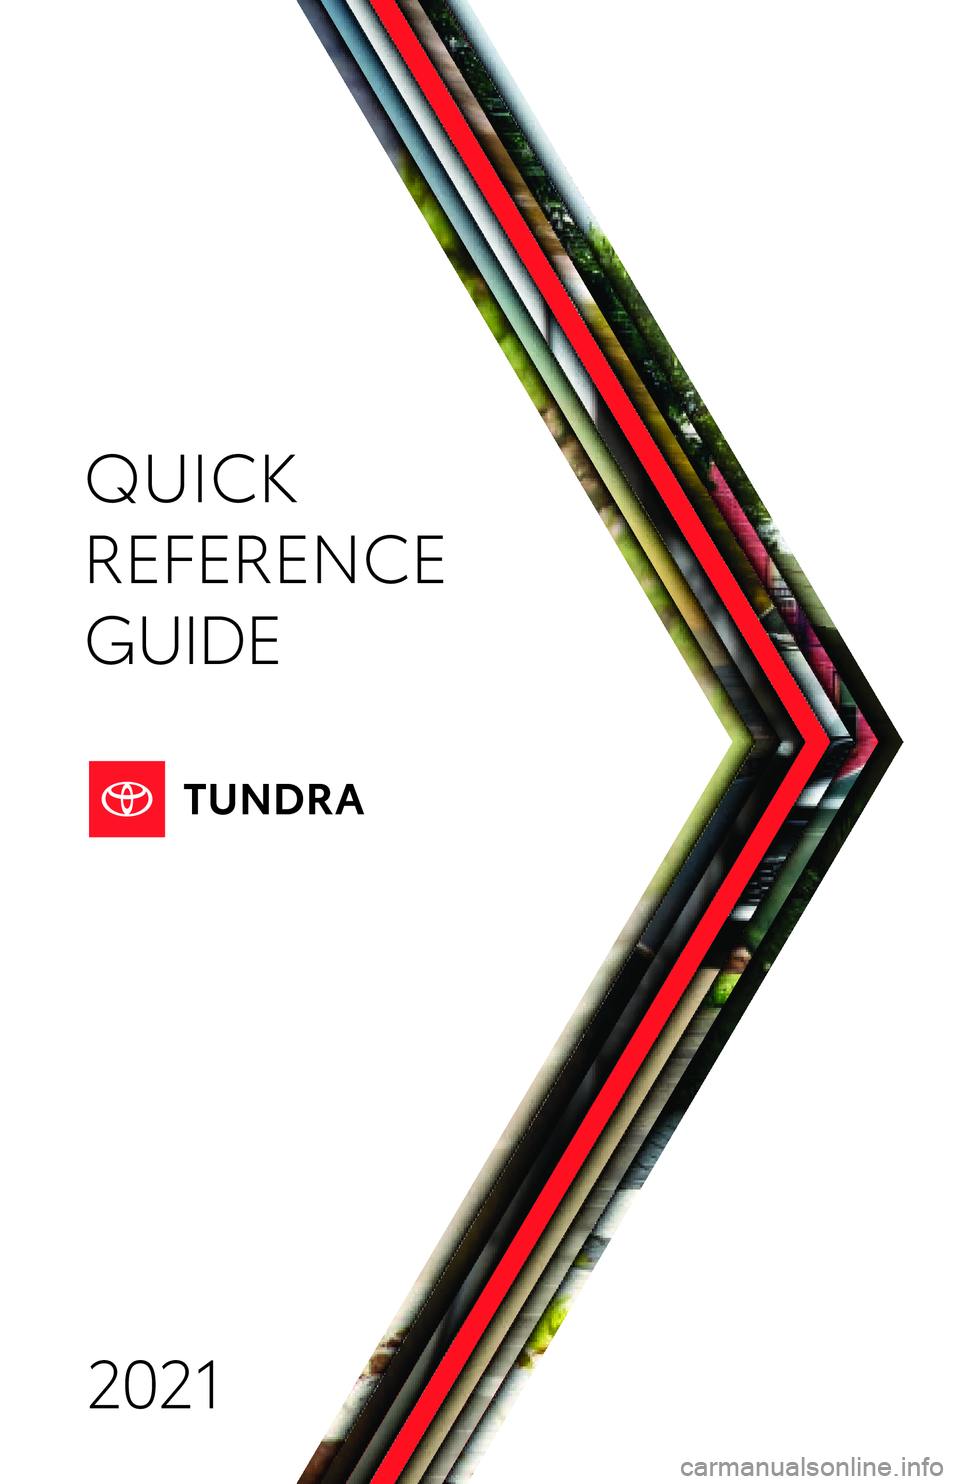 TOYOTA TUNDRA 2021  Owners Manual (in English) QUICK
REFERENCE 
GUIDE
2021
Quick  Reference  Guide 2021
toyot\f.com
Printed  in U. S. A .  6/20 
20-MKG-14820
20-MKG-14820MY21 Toyota Tundra QRG .indd  17/8/20  10:21 AMUntitled-1  27/13/20  11:58 AM